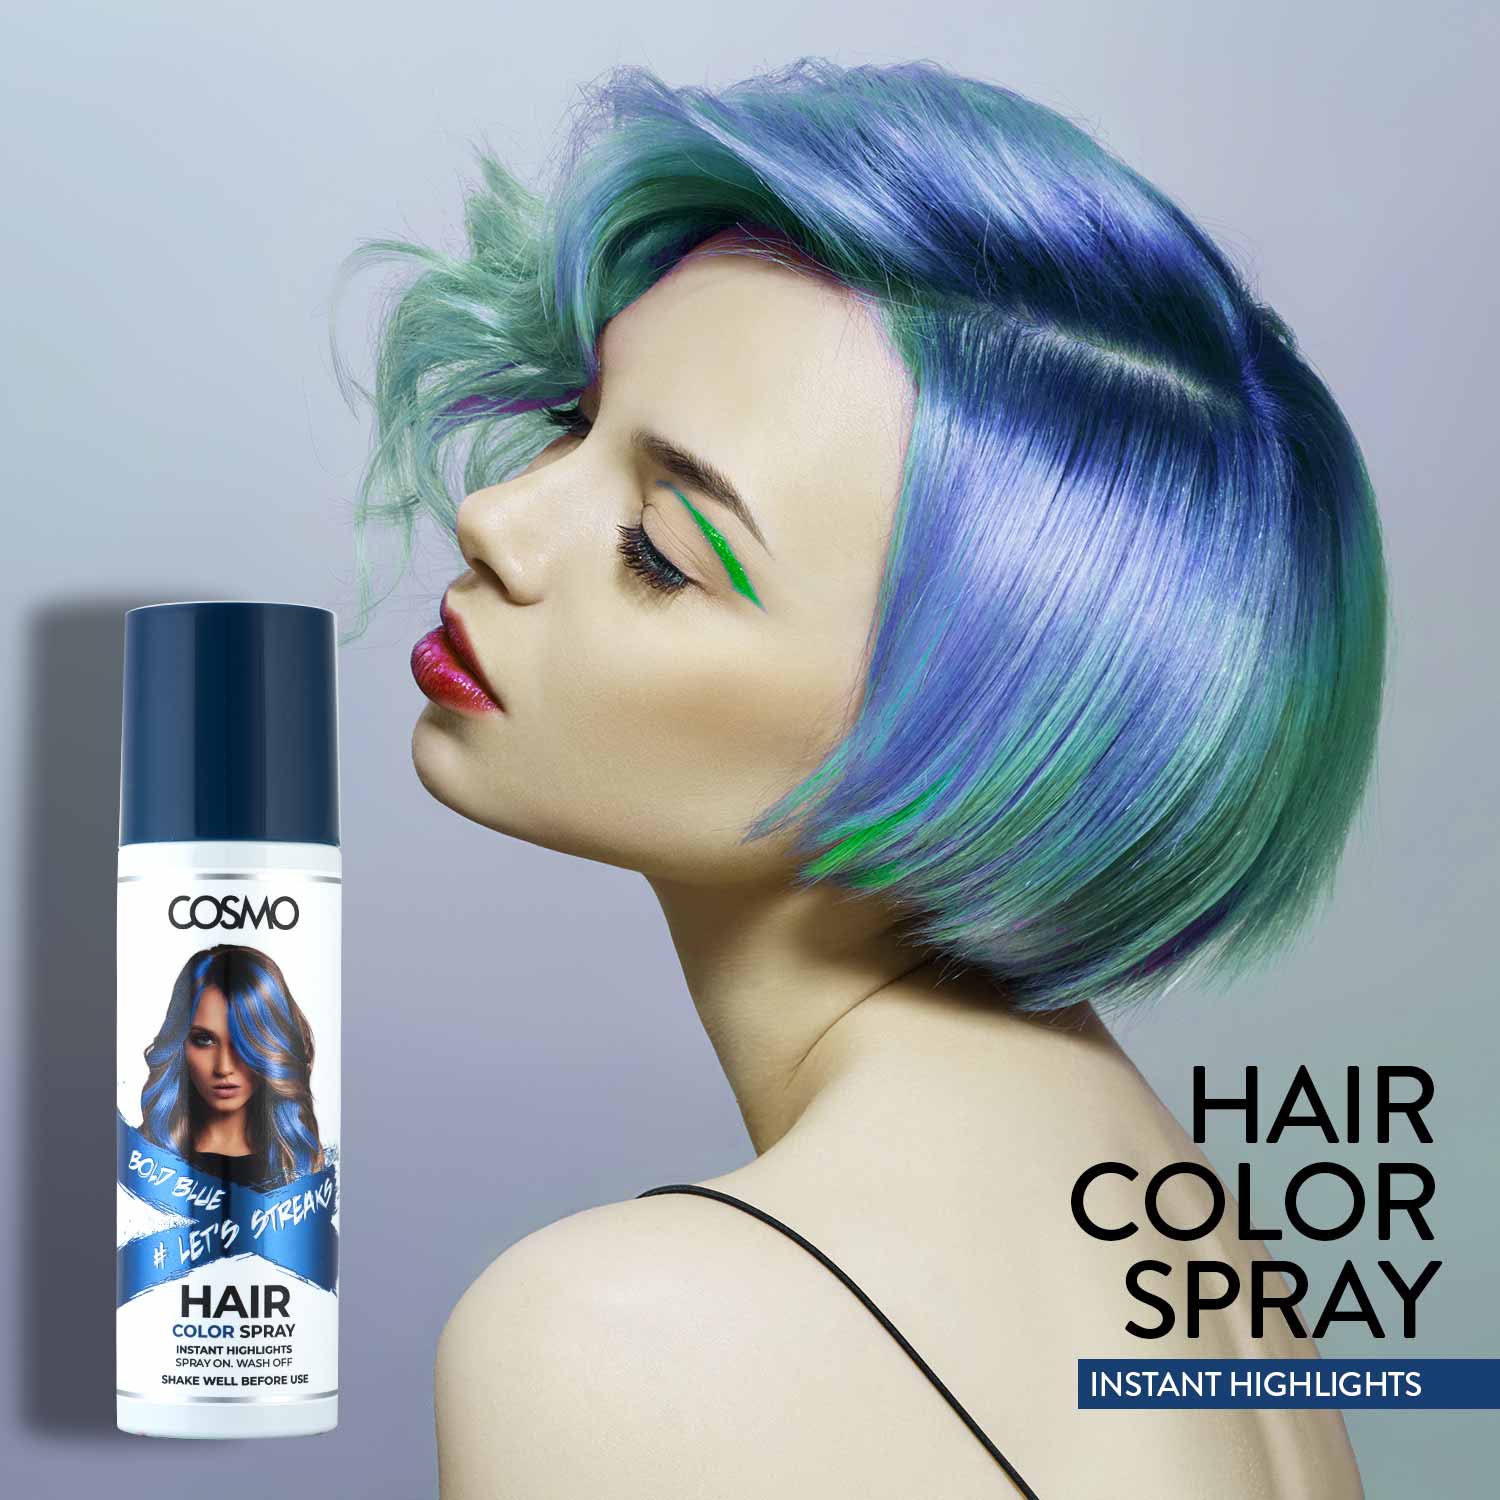 Source Sevich New Temporary Hair Dye Hair Color Spray for Men and Women Hair  Color Change Freely on malibabacom